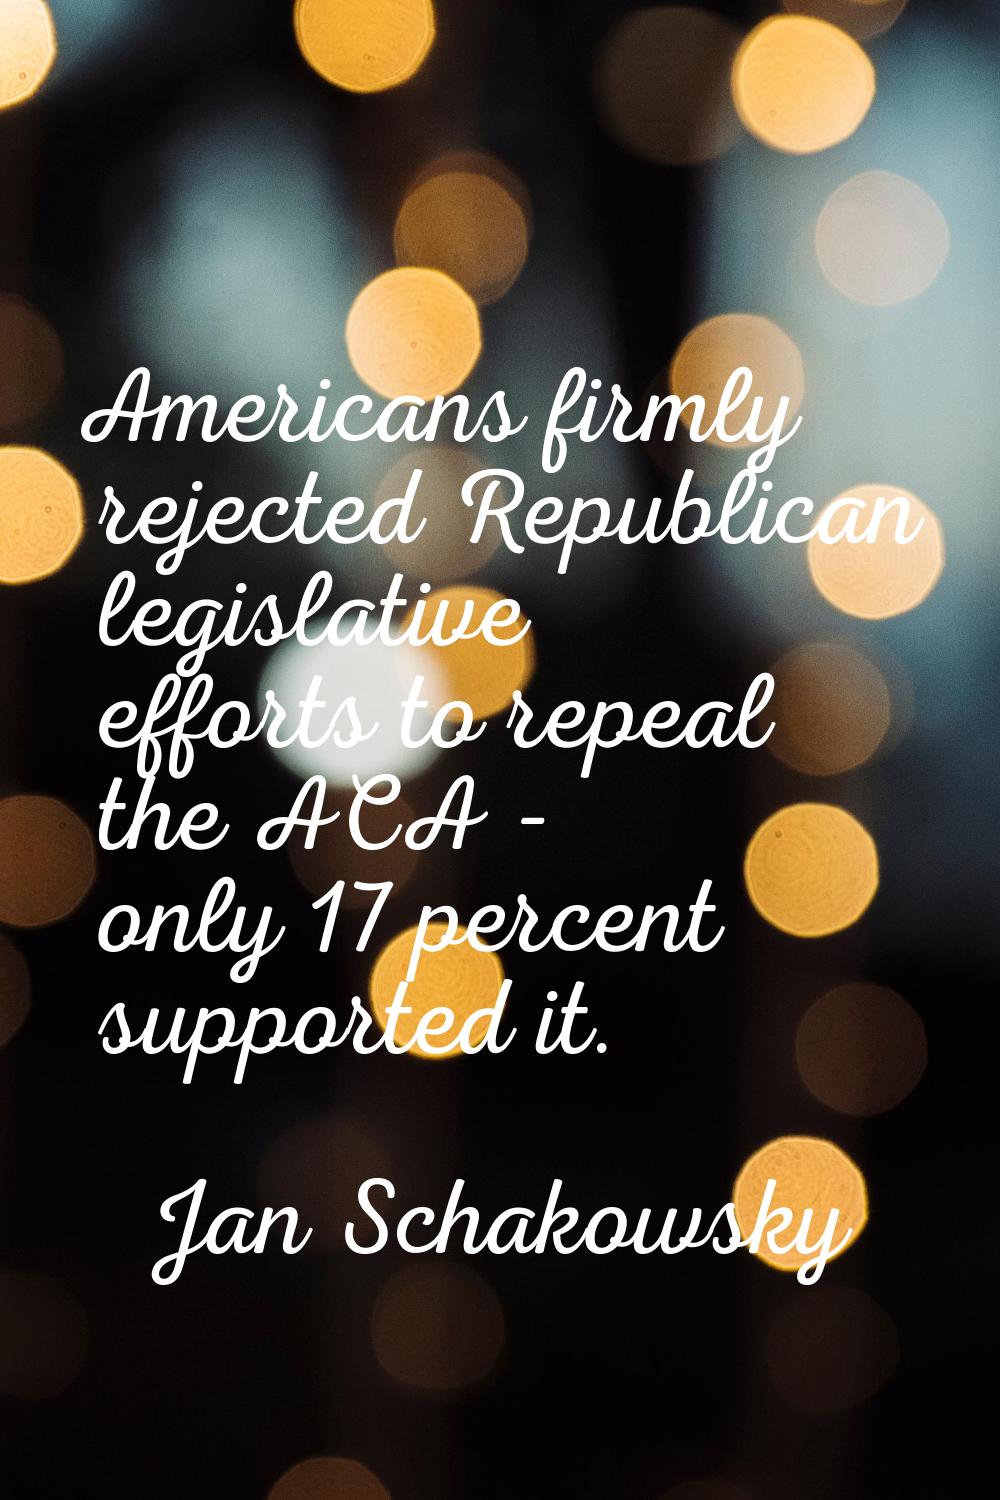 Americans firmly rejected Republican legislative efforts to repeal the ACA - only 17 percent suppor